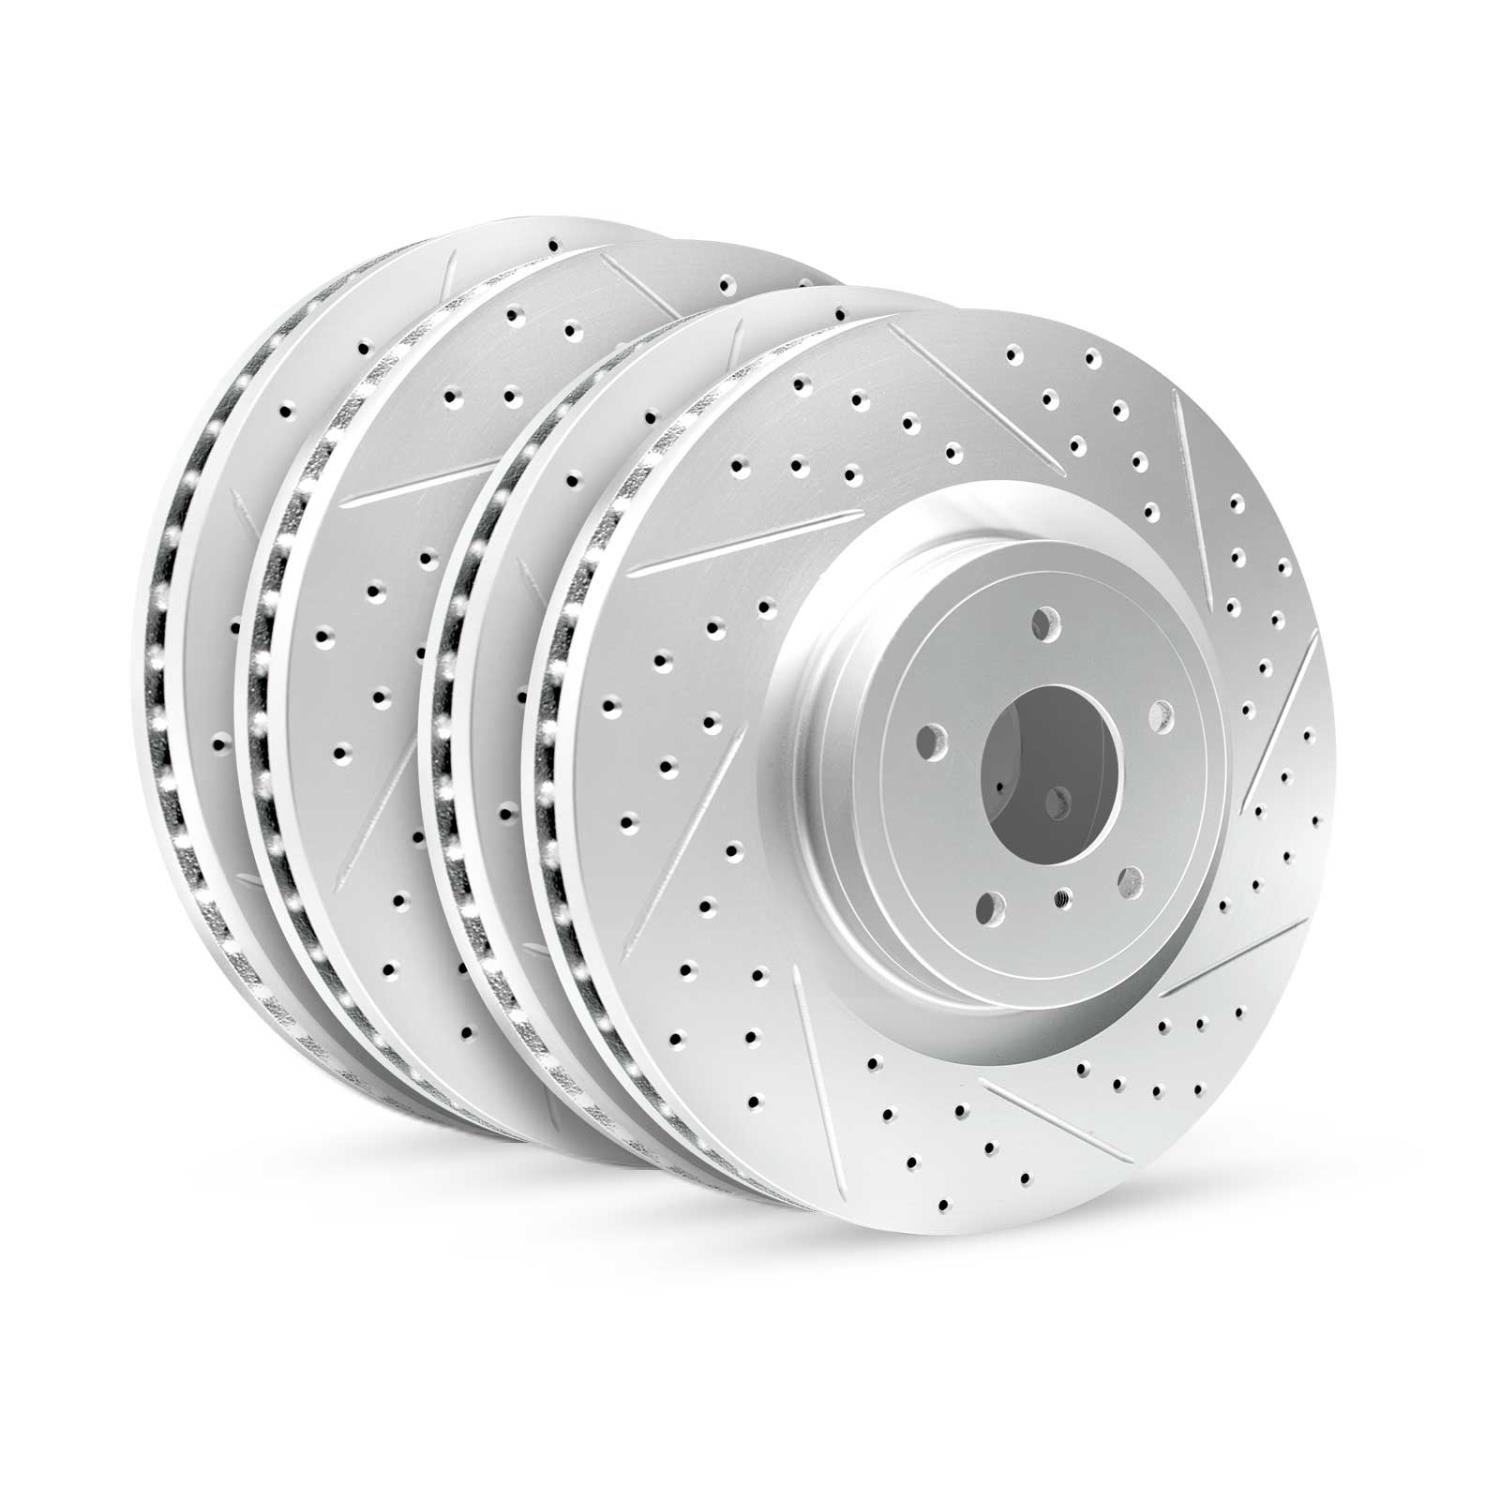 GEO-Carbon Drilled/Slotted Rotors, 1998-2015 Audi/Porsche/Volkswagen, Position: Front/Rear